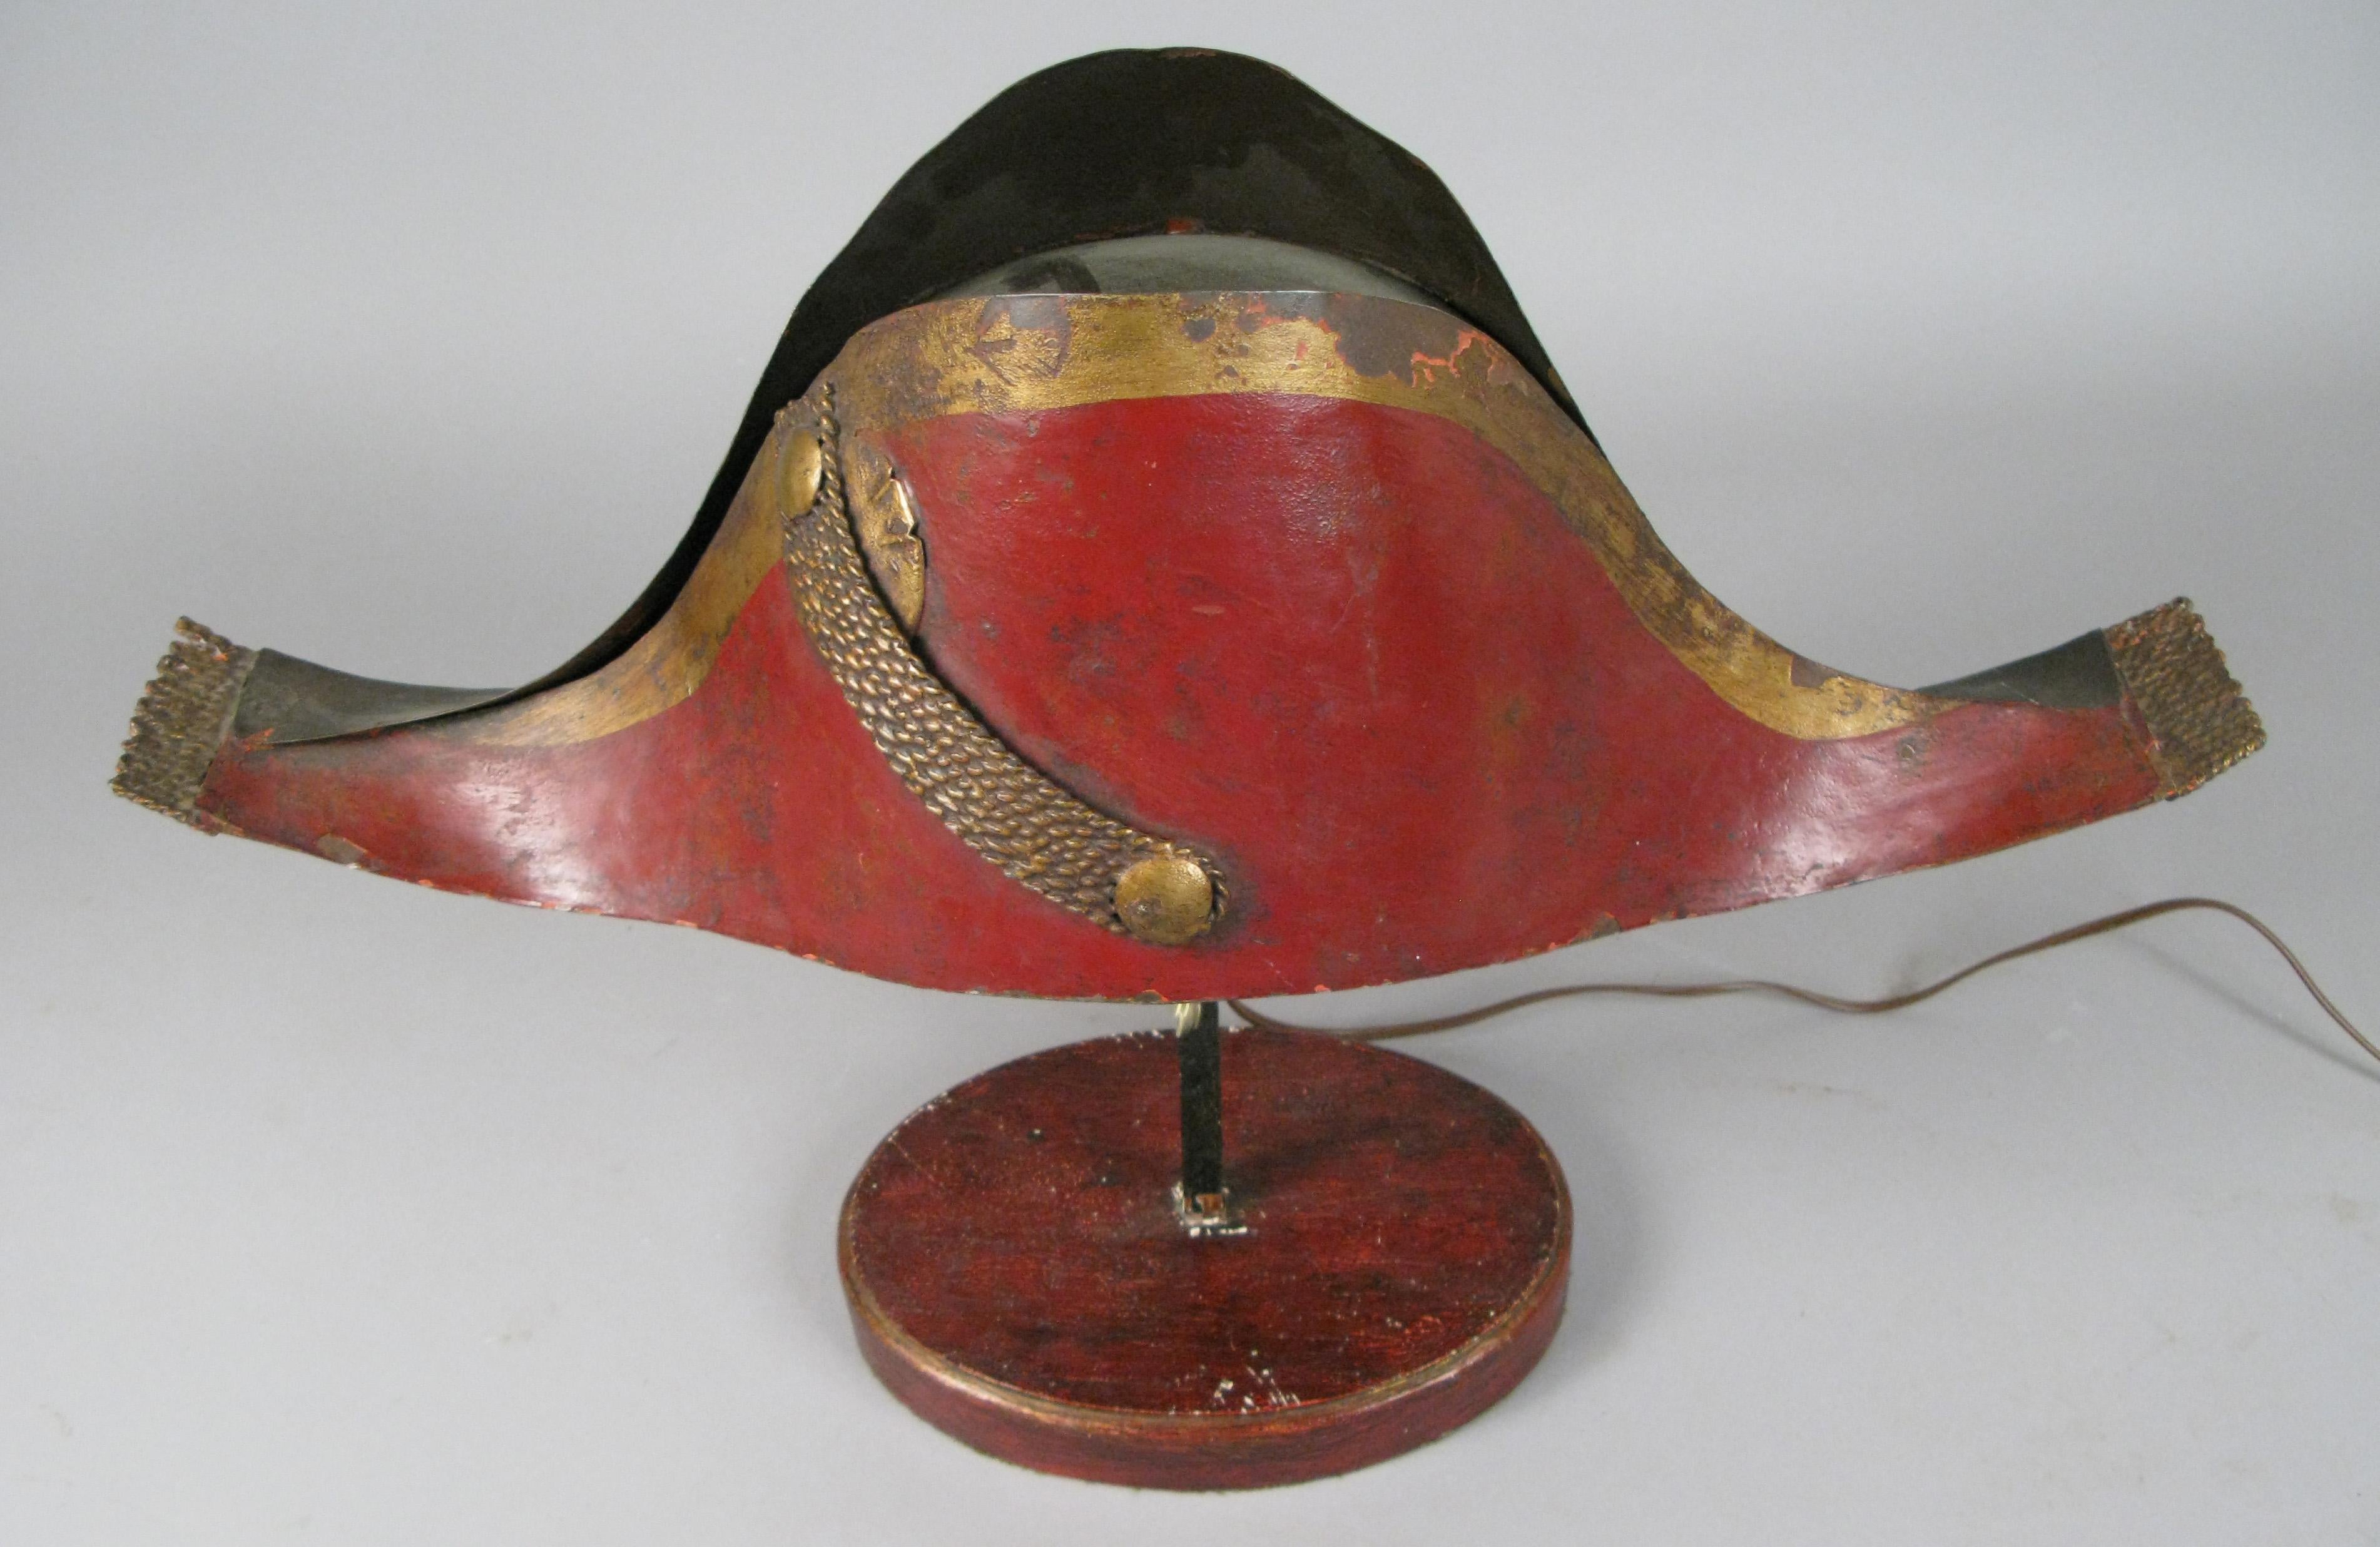 A very charming early 20th century lamp in the form of a tole metal Napoleonic chapeau, mounted on a wood base. Wired to accept a small bulb with a standard base. It is really more of a lighted object than a light source.